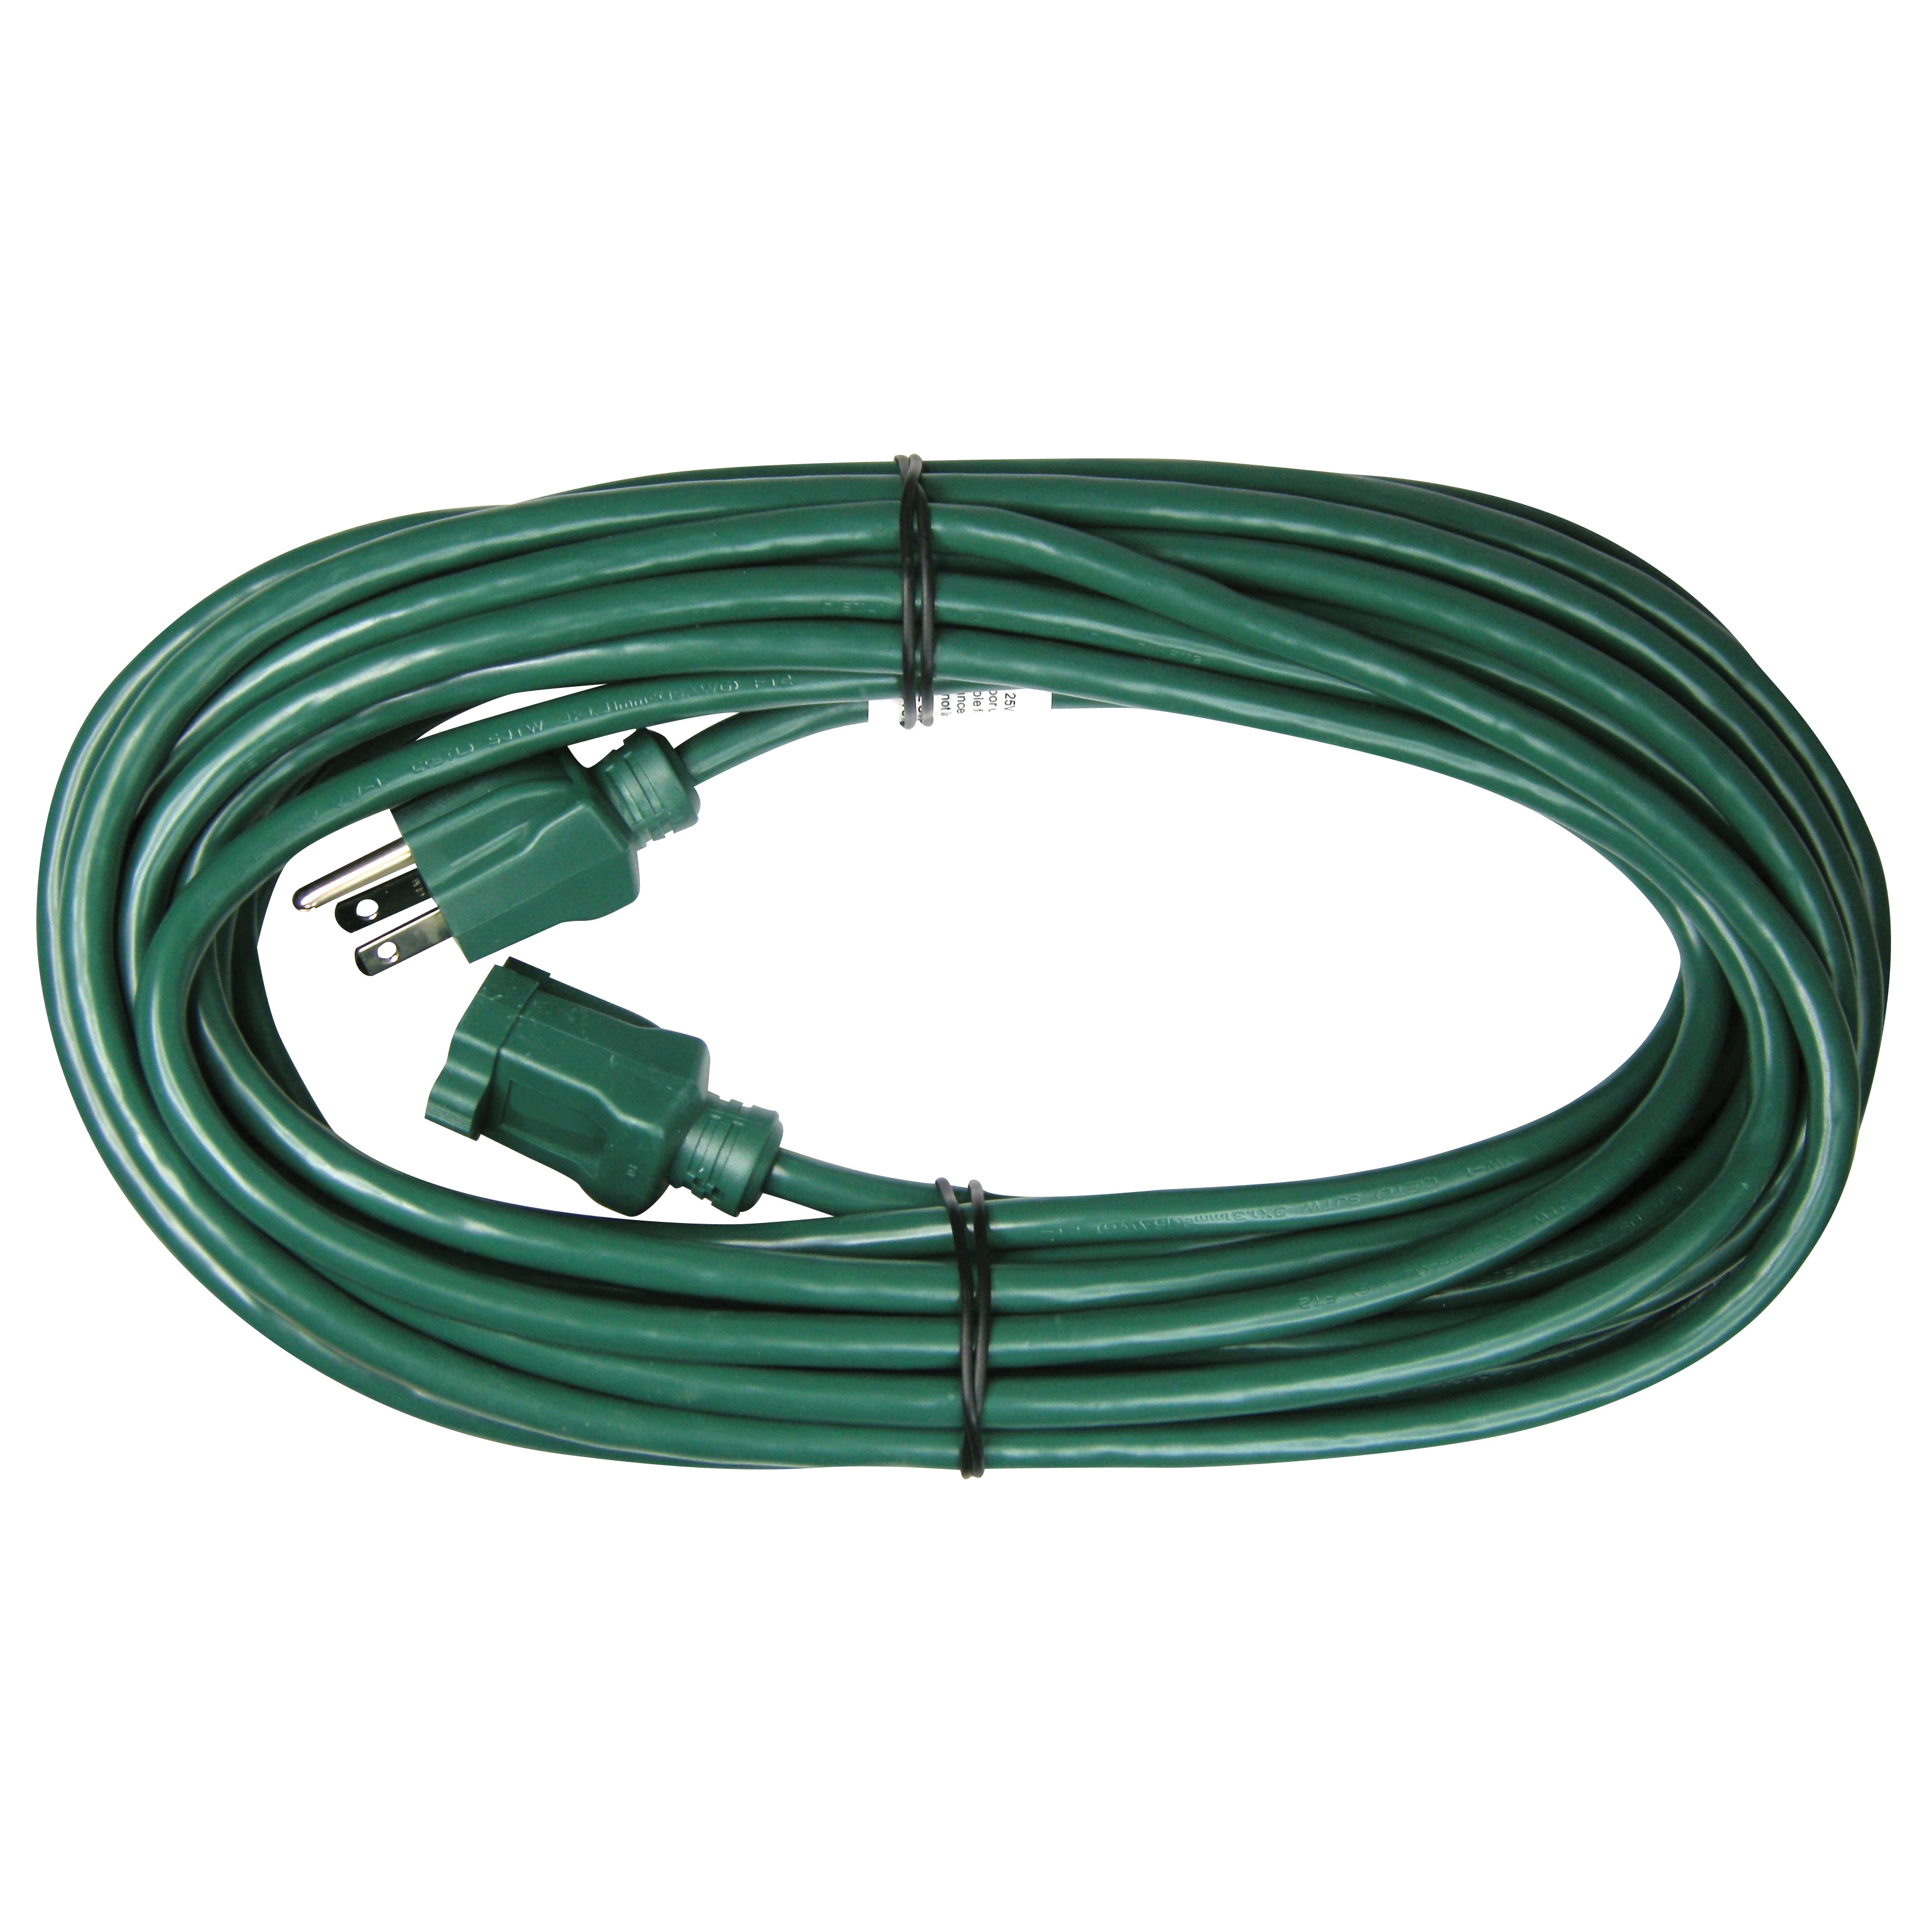 OR880628 Extension Cord, 16 AWG Cable, 40 ft L, 125 V, Green